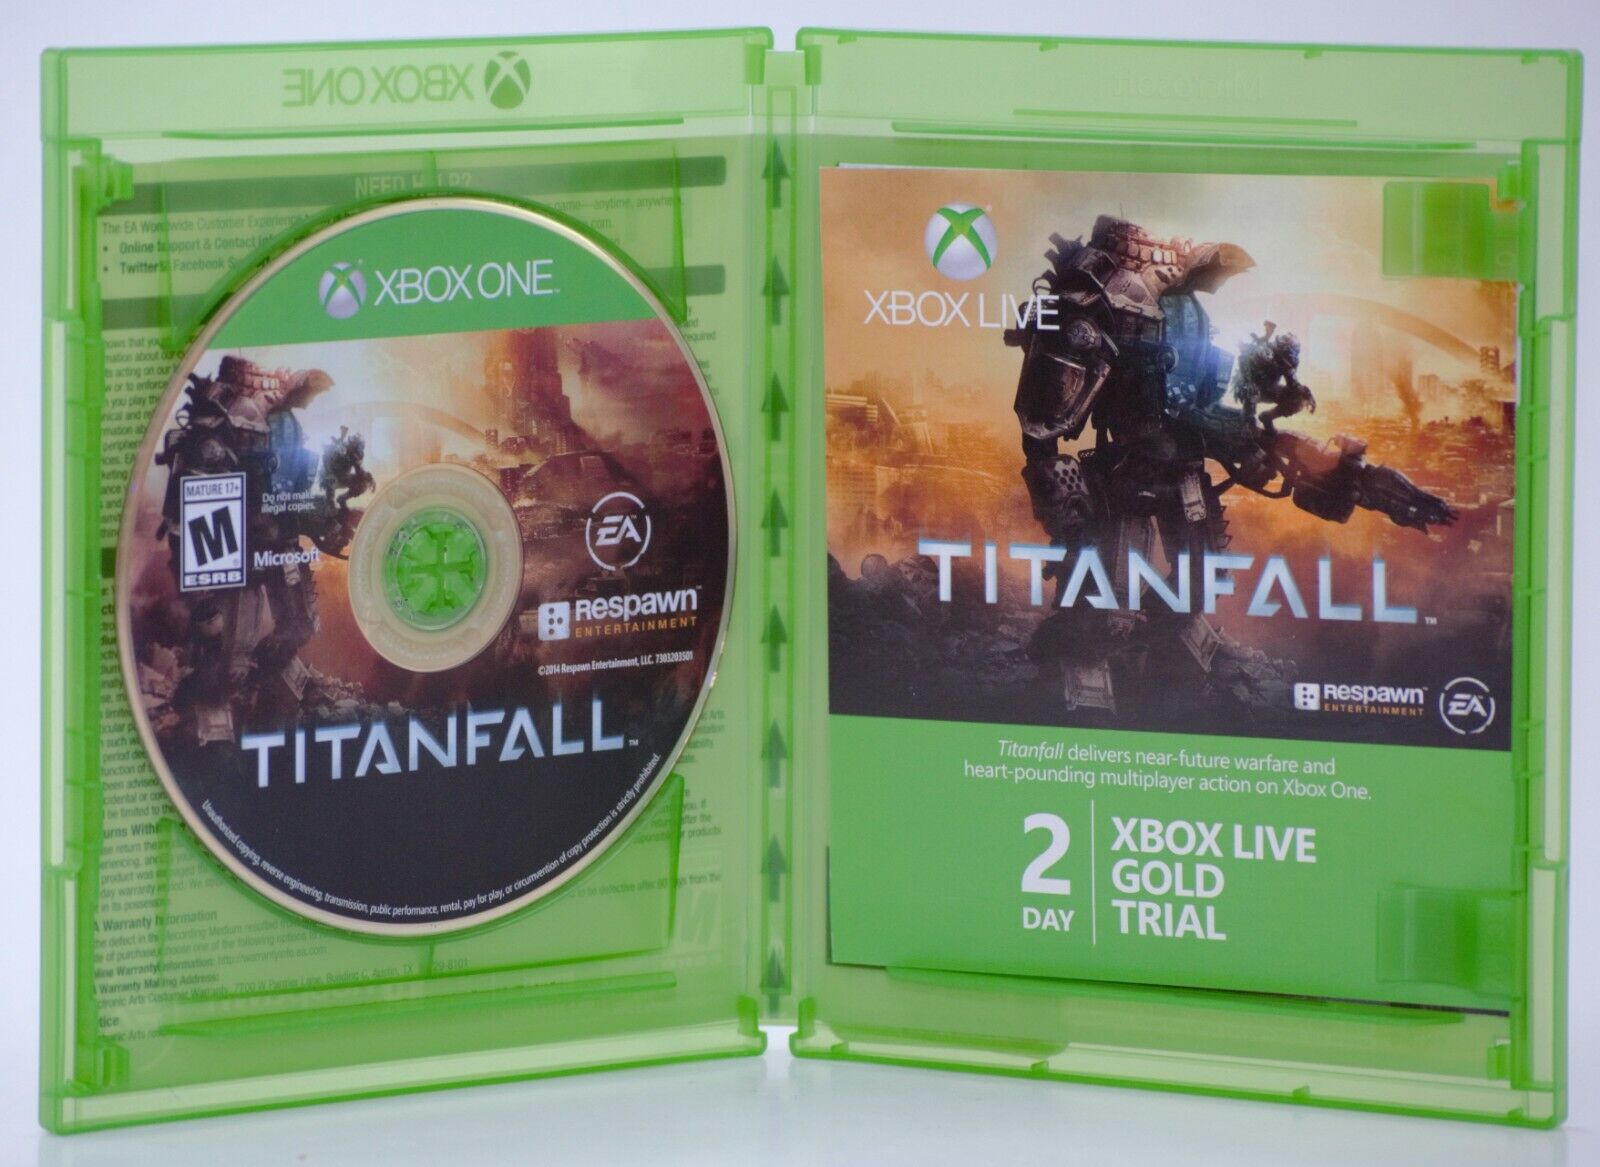 Titanfall Xbox 360 Game For Sale